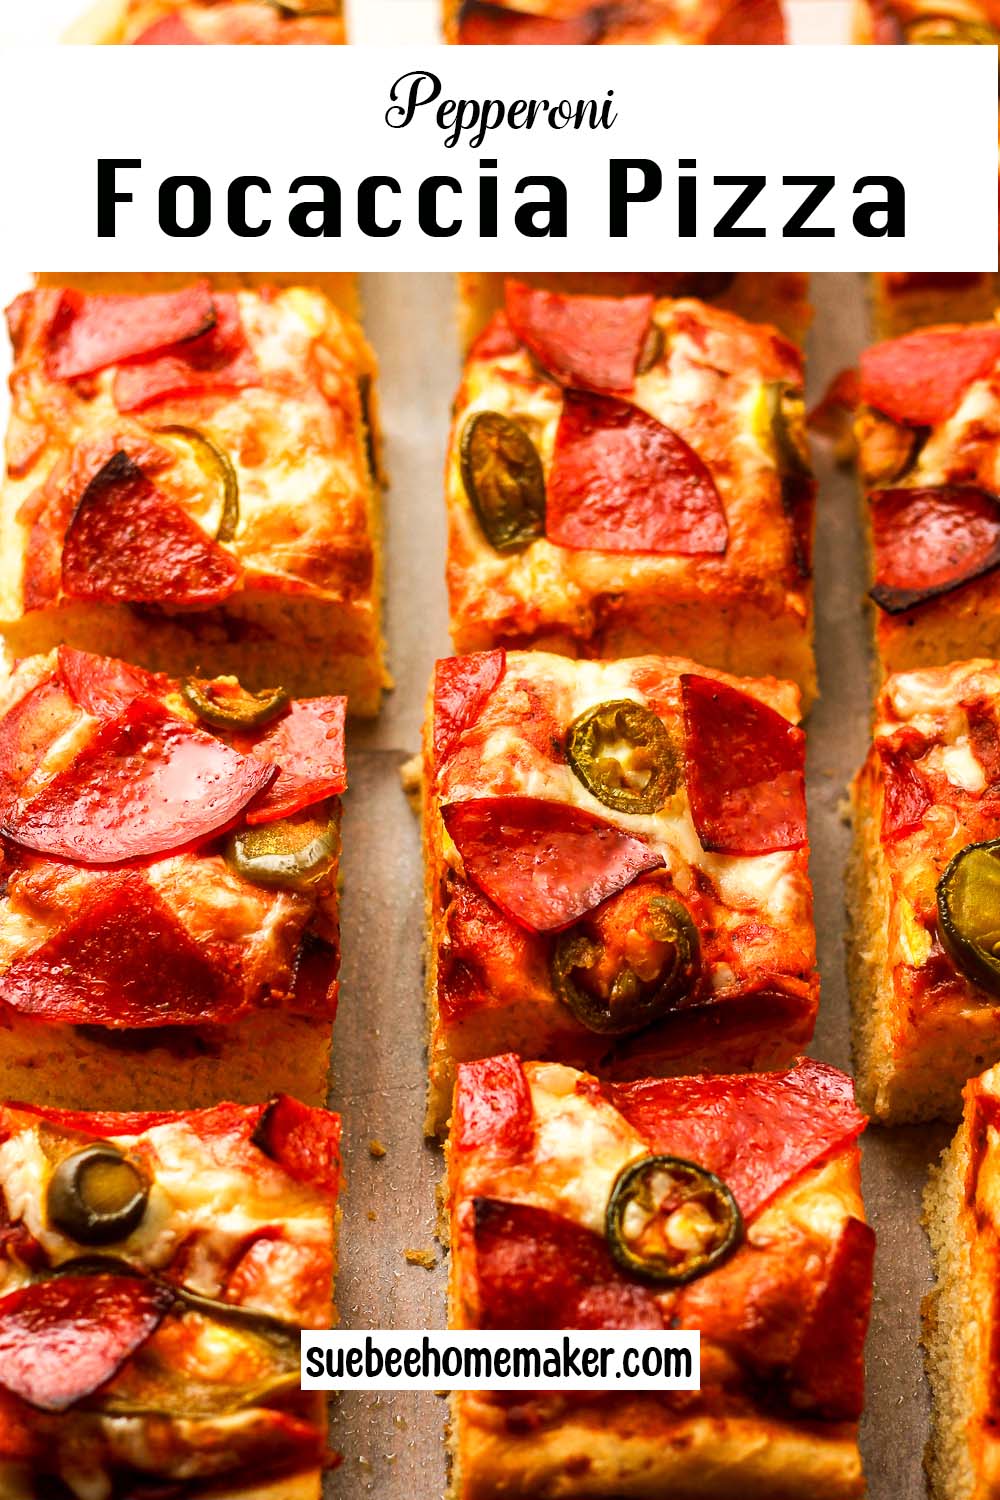 Overhead view of sliced pepperoni focaccia pizza.